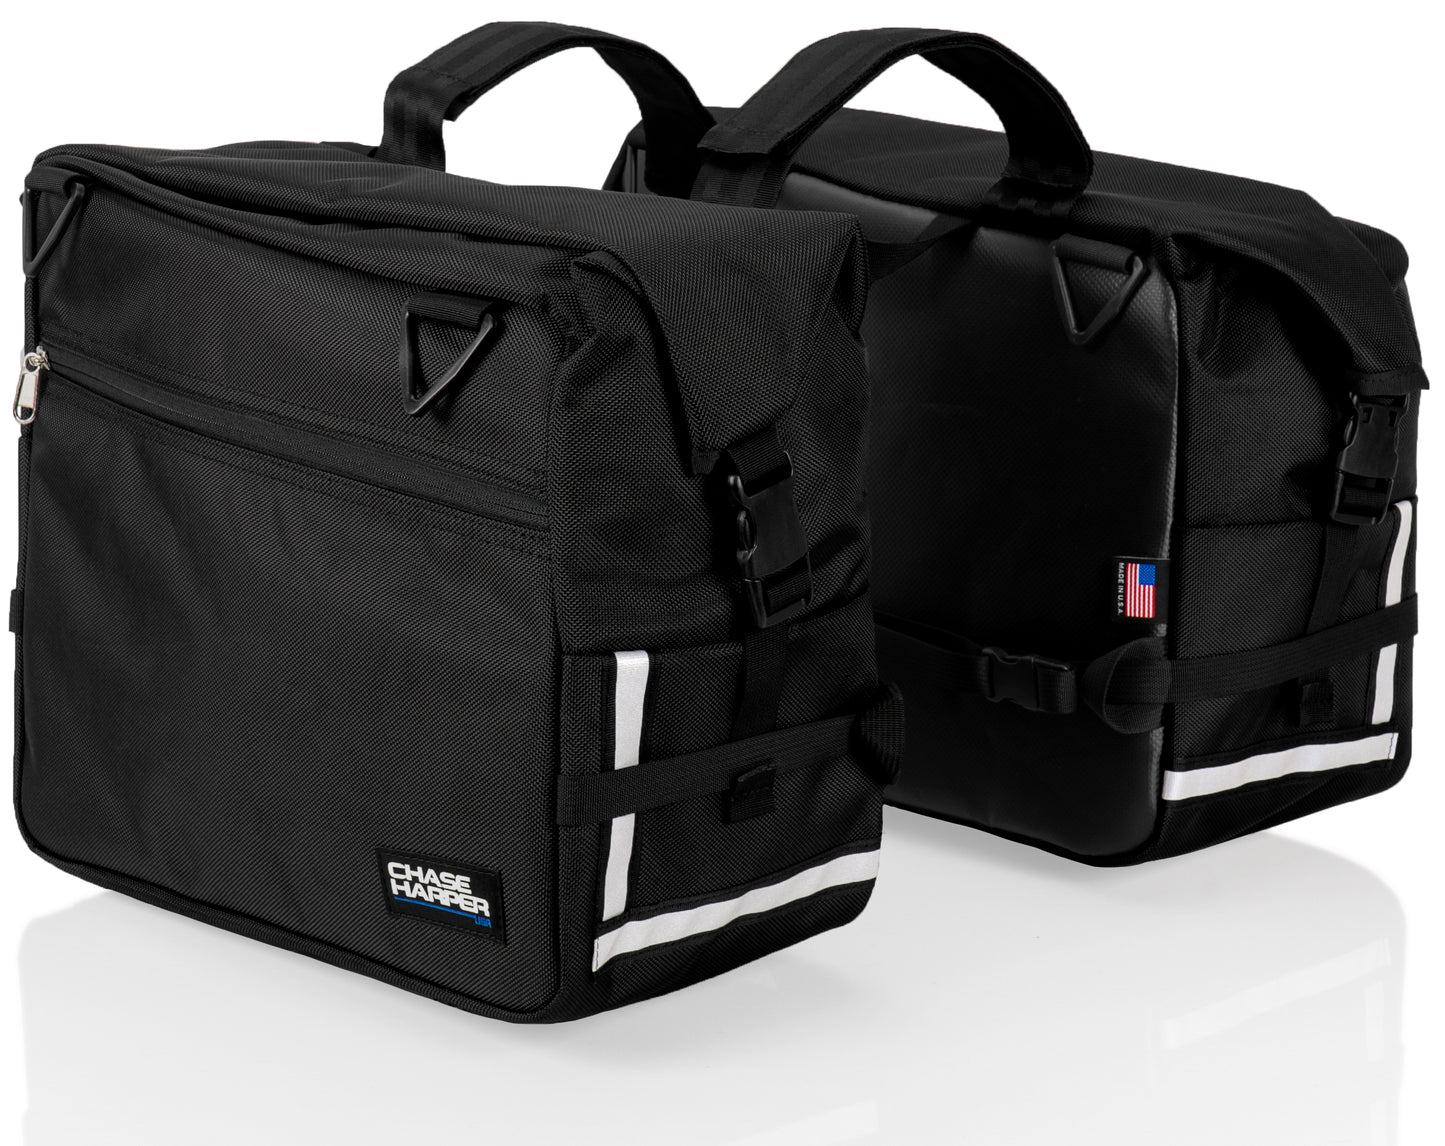 Chase Harper USA 3850 Roll-Top Saddle Bags - 2020 Model